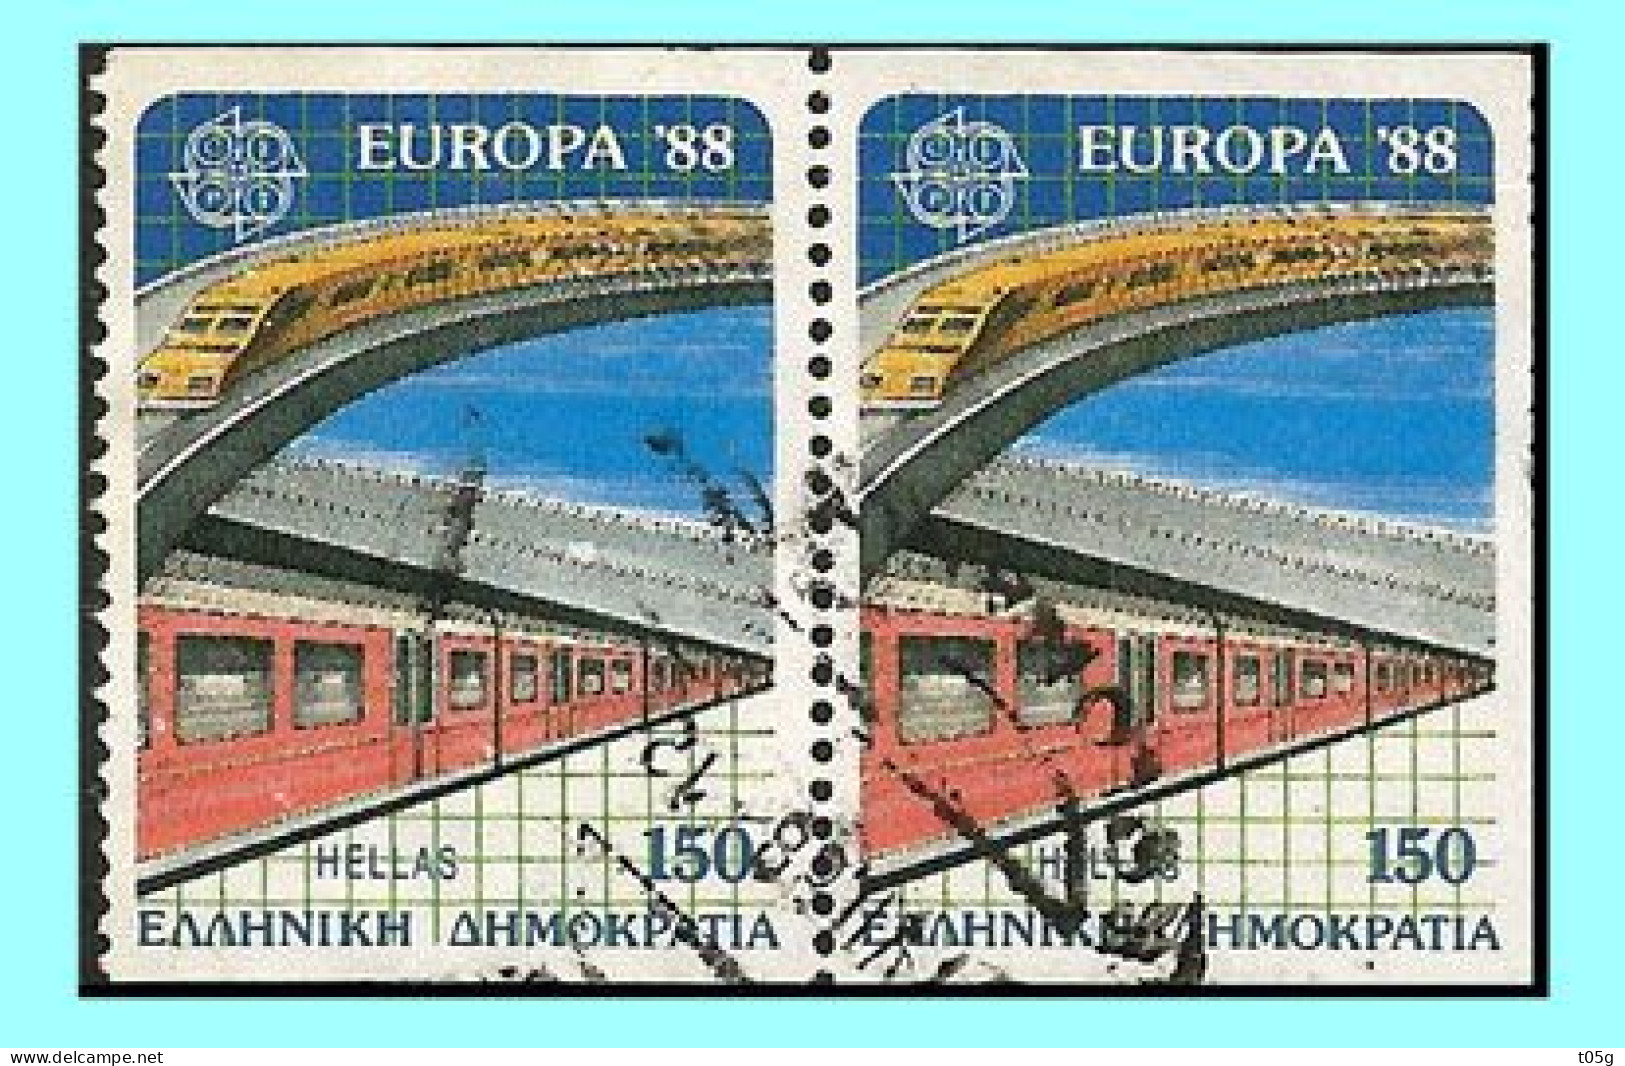 GREECE- GRECE- HELLAS 1988: 150drx Horizontal Pair Europa CEPT -Se-tenant  Horizontally Imperforate used - Used Stamps